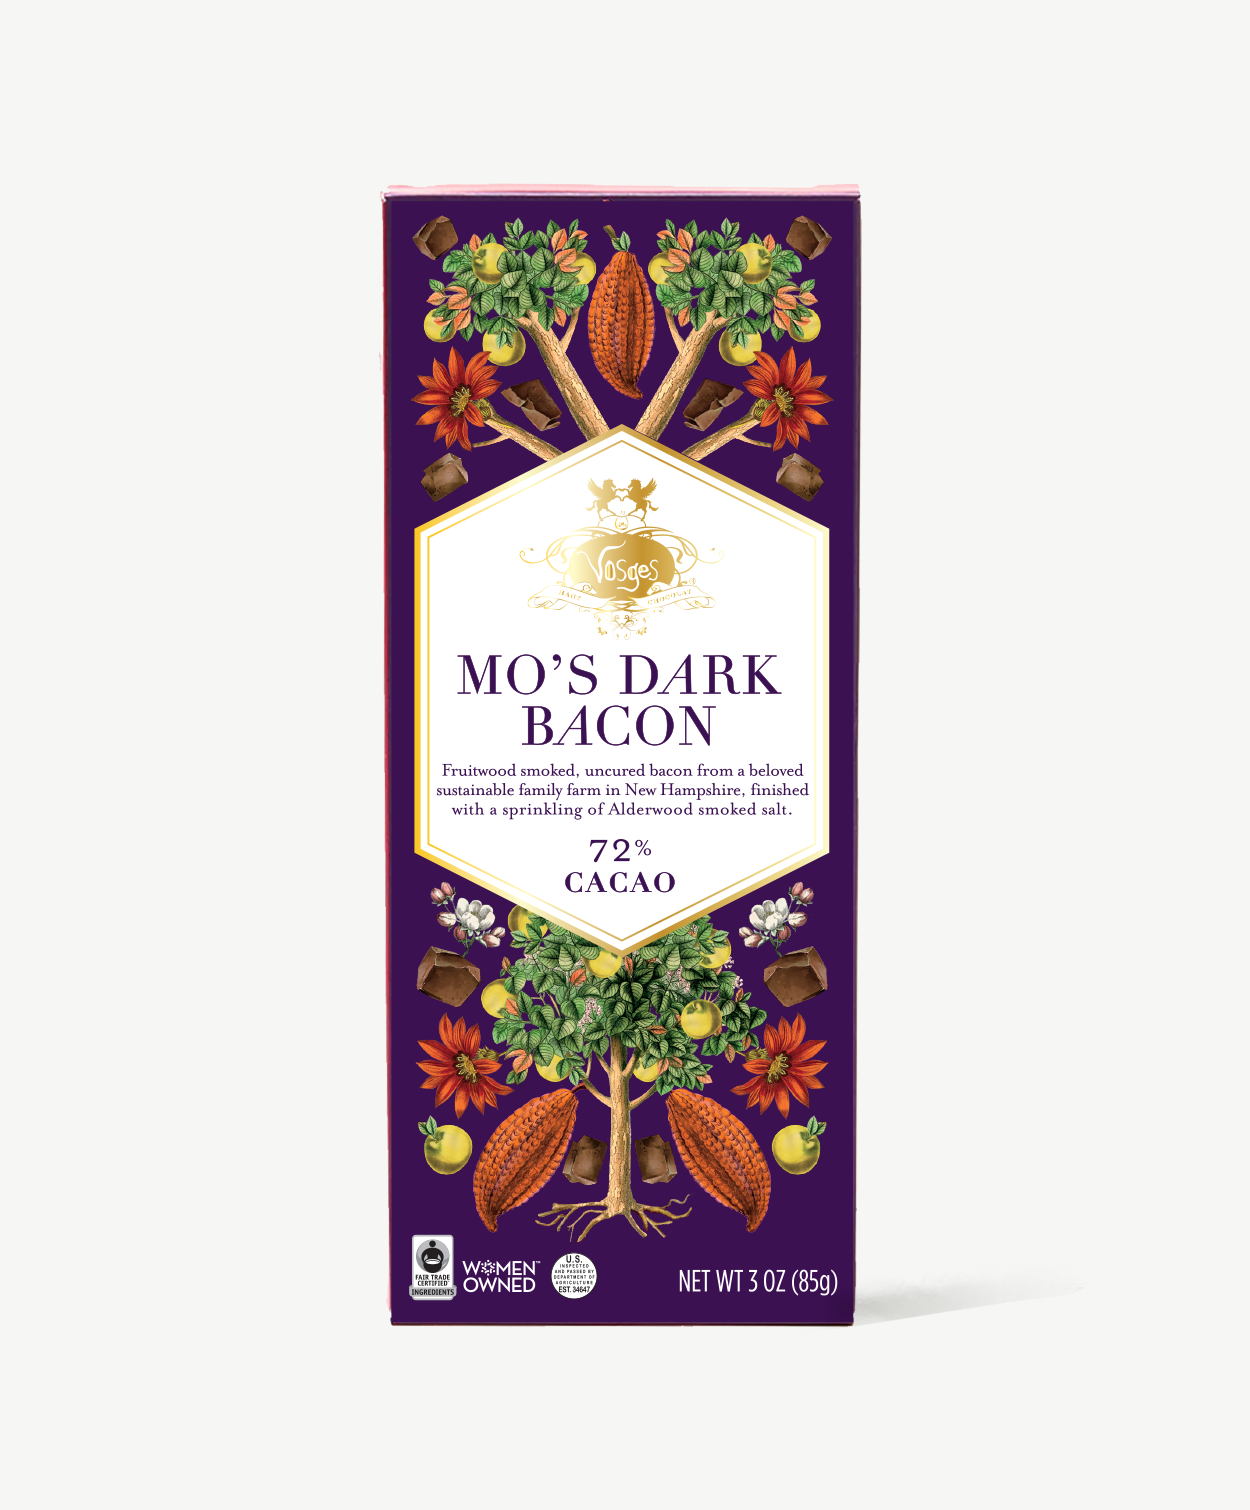 Vosges Mo's Dark Chocolate Bacon bar stands upright displaying a purple box  featuring illustrations of cherries and cheese on a grey background.